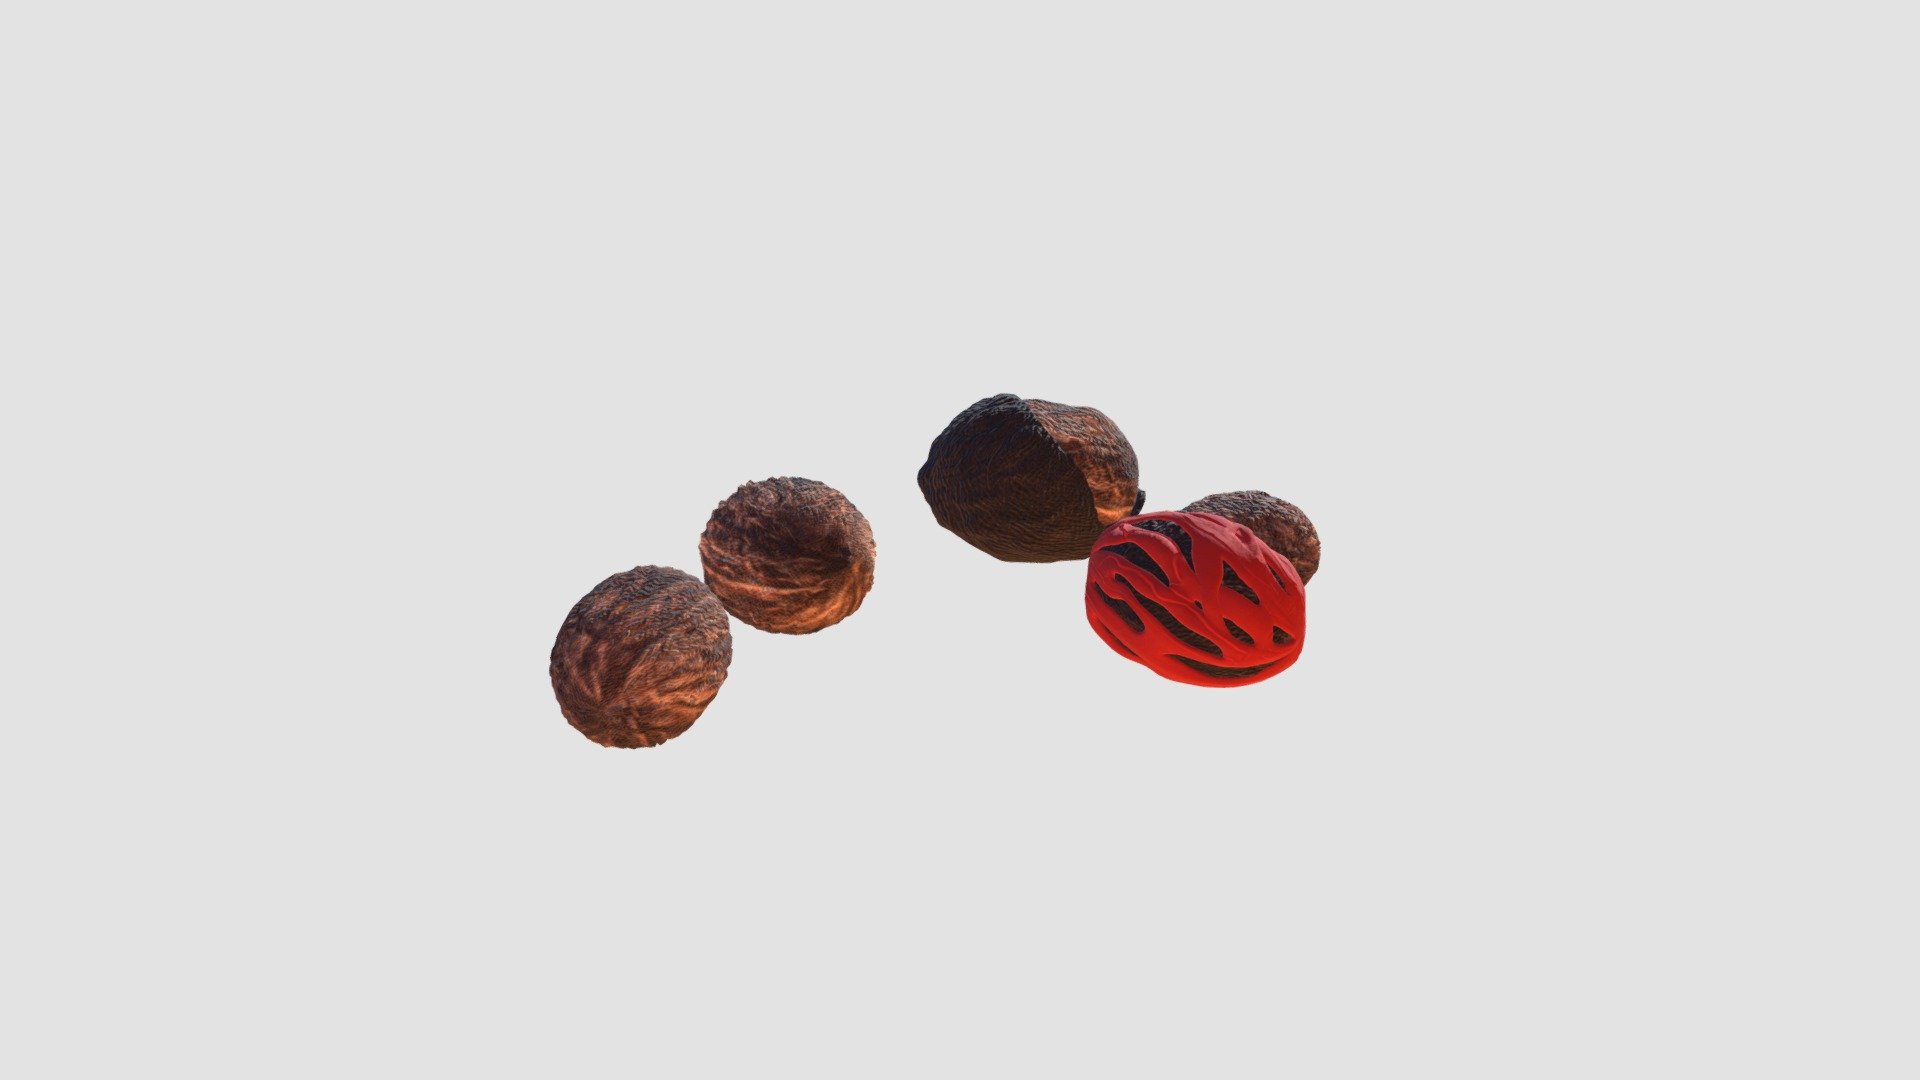 Highly detailed 3d model of nutmeg with all textures, shaders and materials. It is ready to use, just put it into your scene 3d model